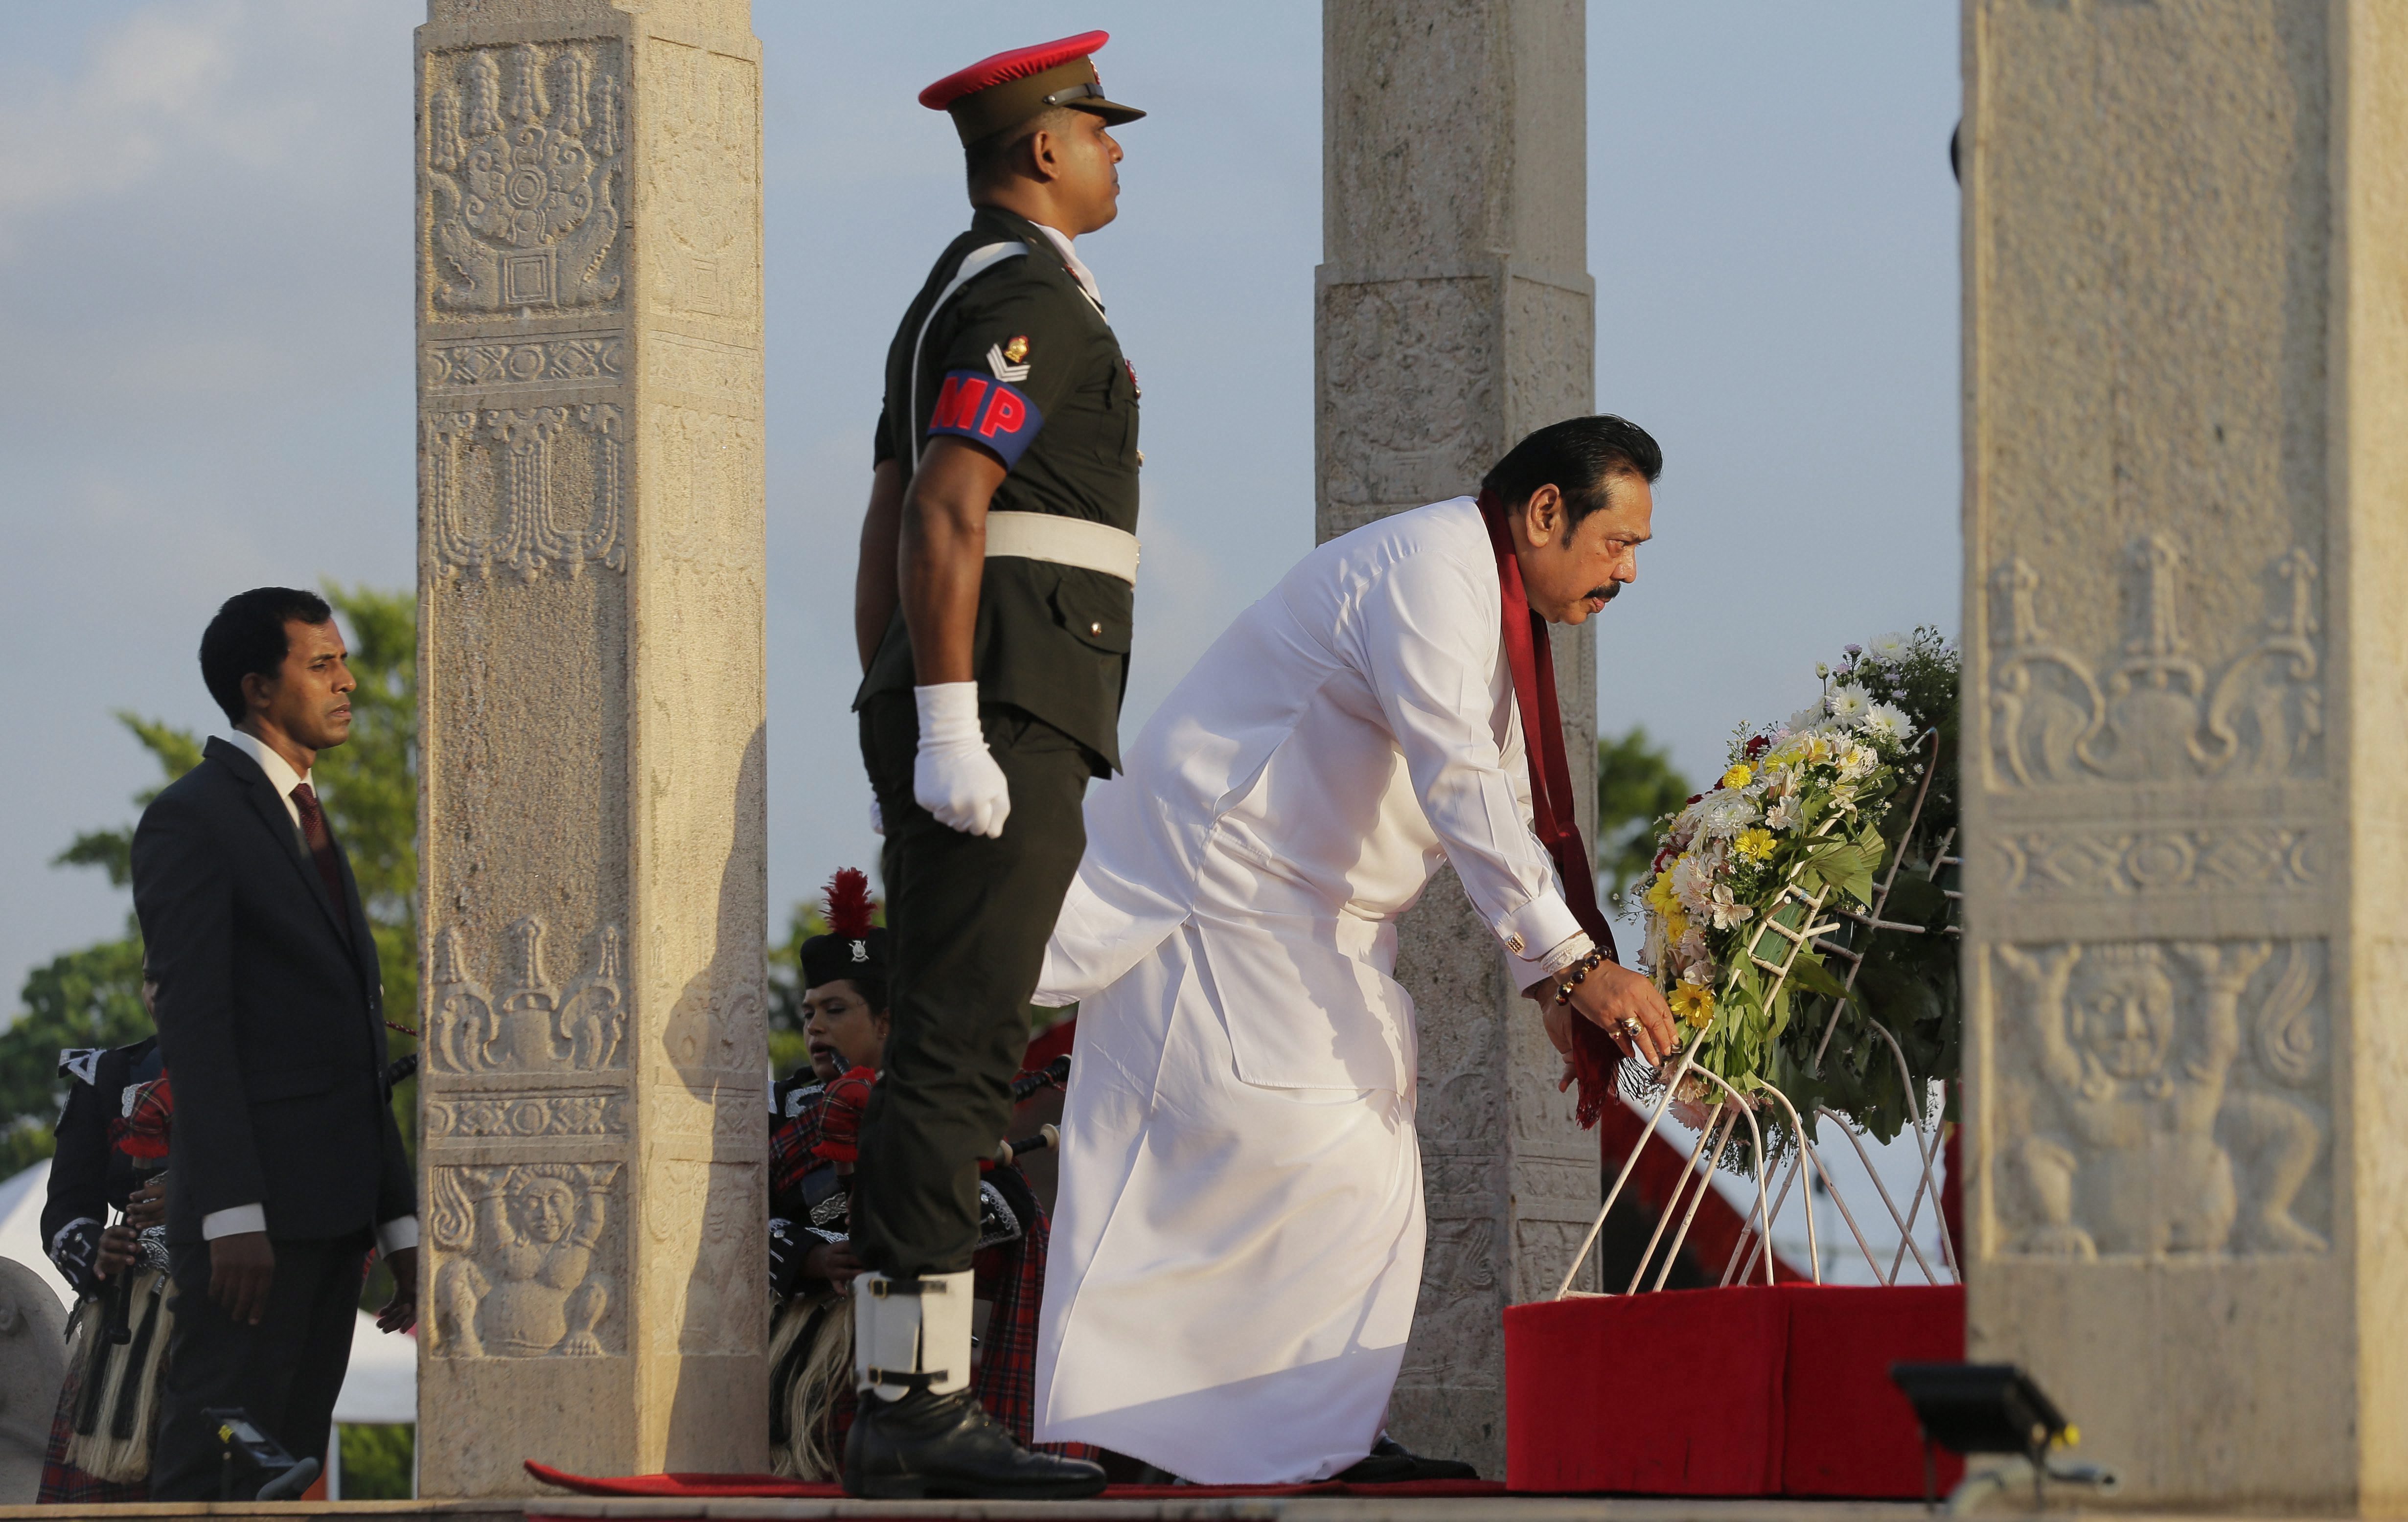 Sri Lanka's former president and current leader of the opposition Mahinda Rajapaksa, in white, places a wreath at the fallen heroes memorial during the tenth anniversary of Sri Lanka's civil war victory in Colombo, Sri Lanka - PTI